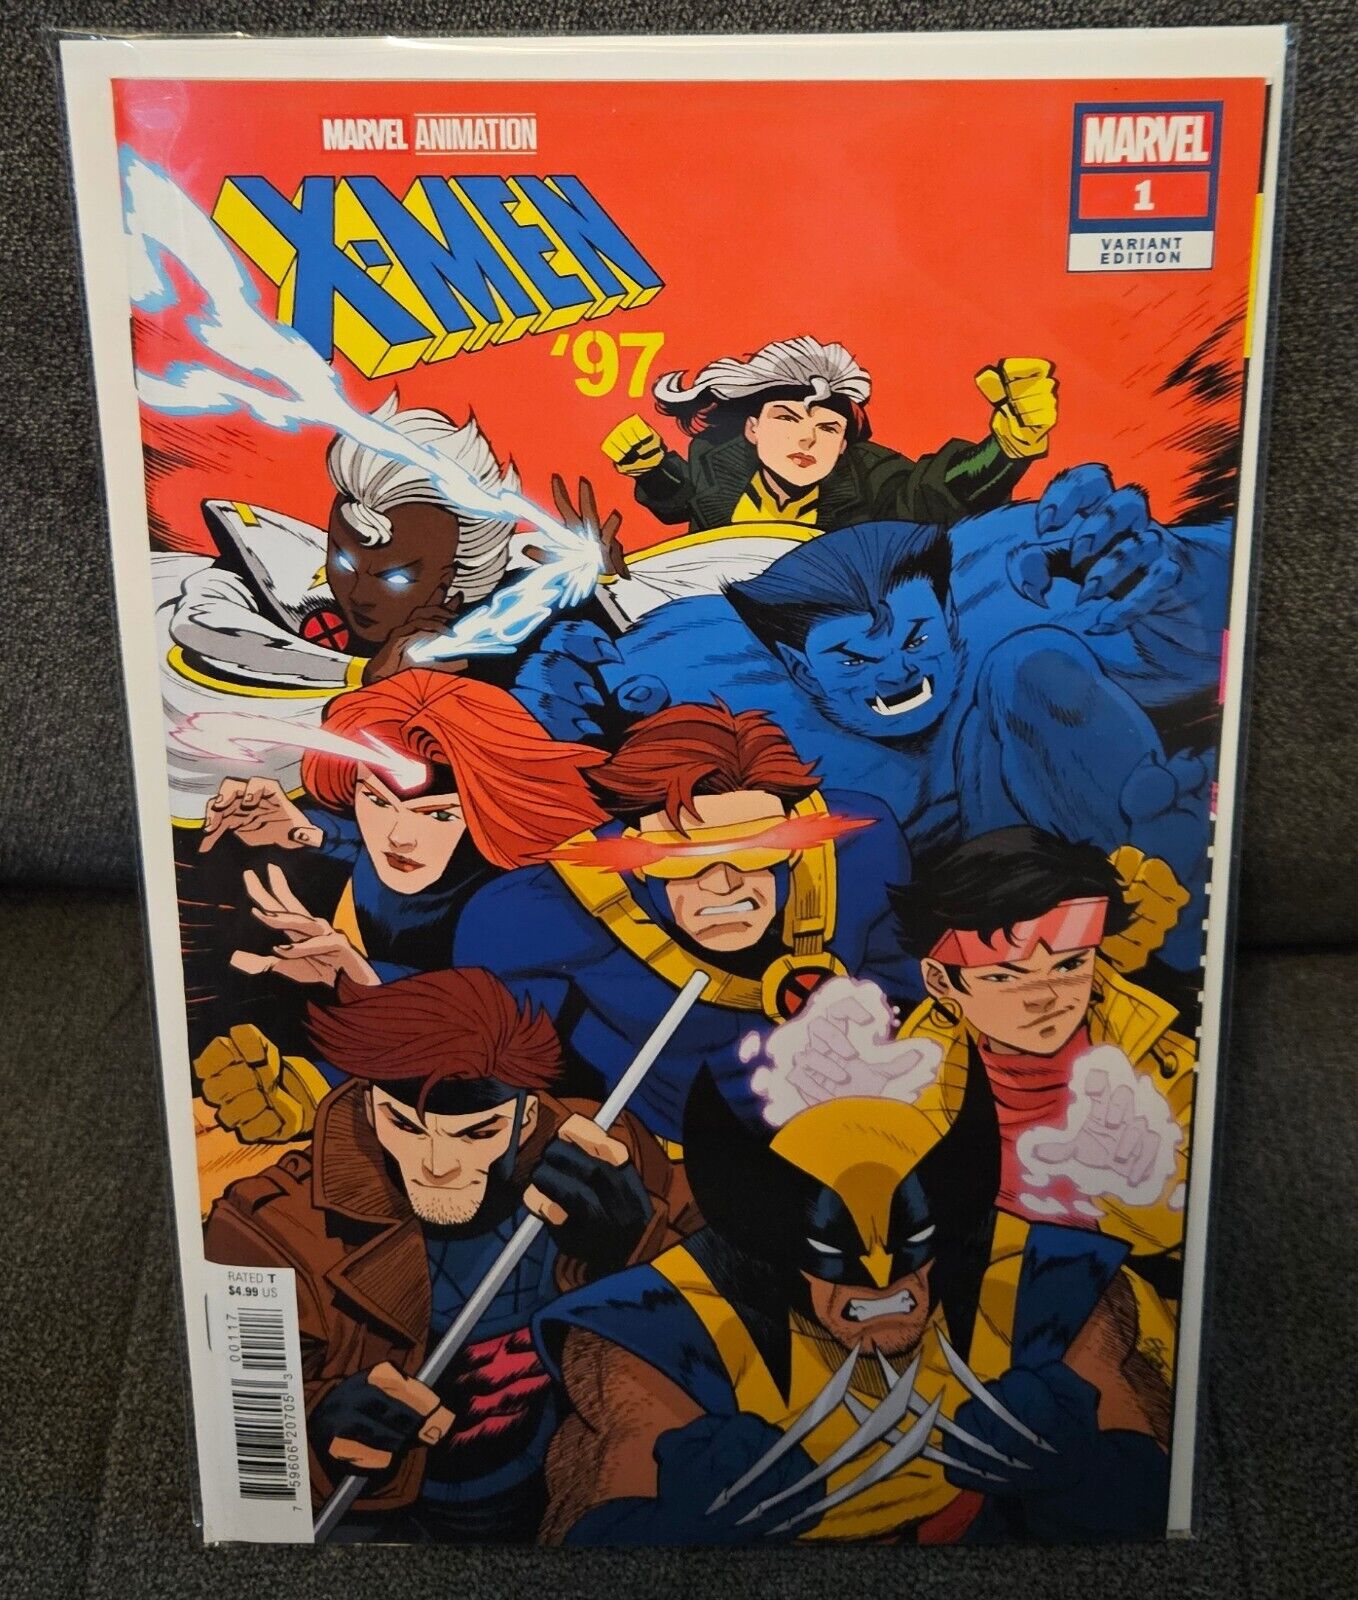 X-MEN 97 #1 1:25 ETHAN YOUNG VARIANT